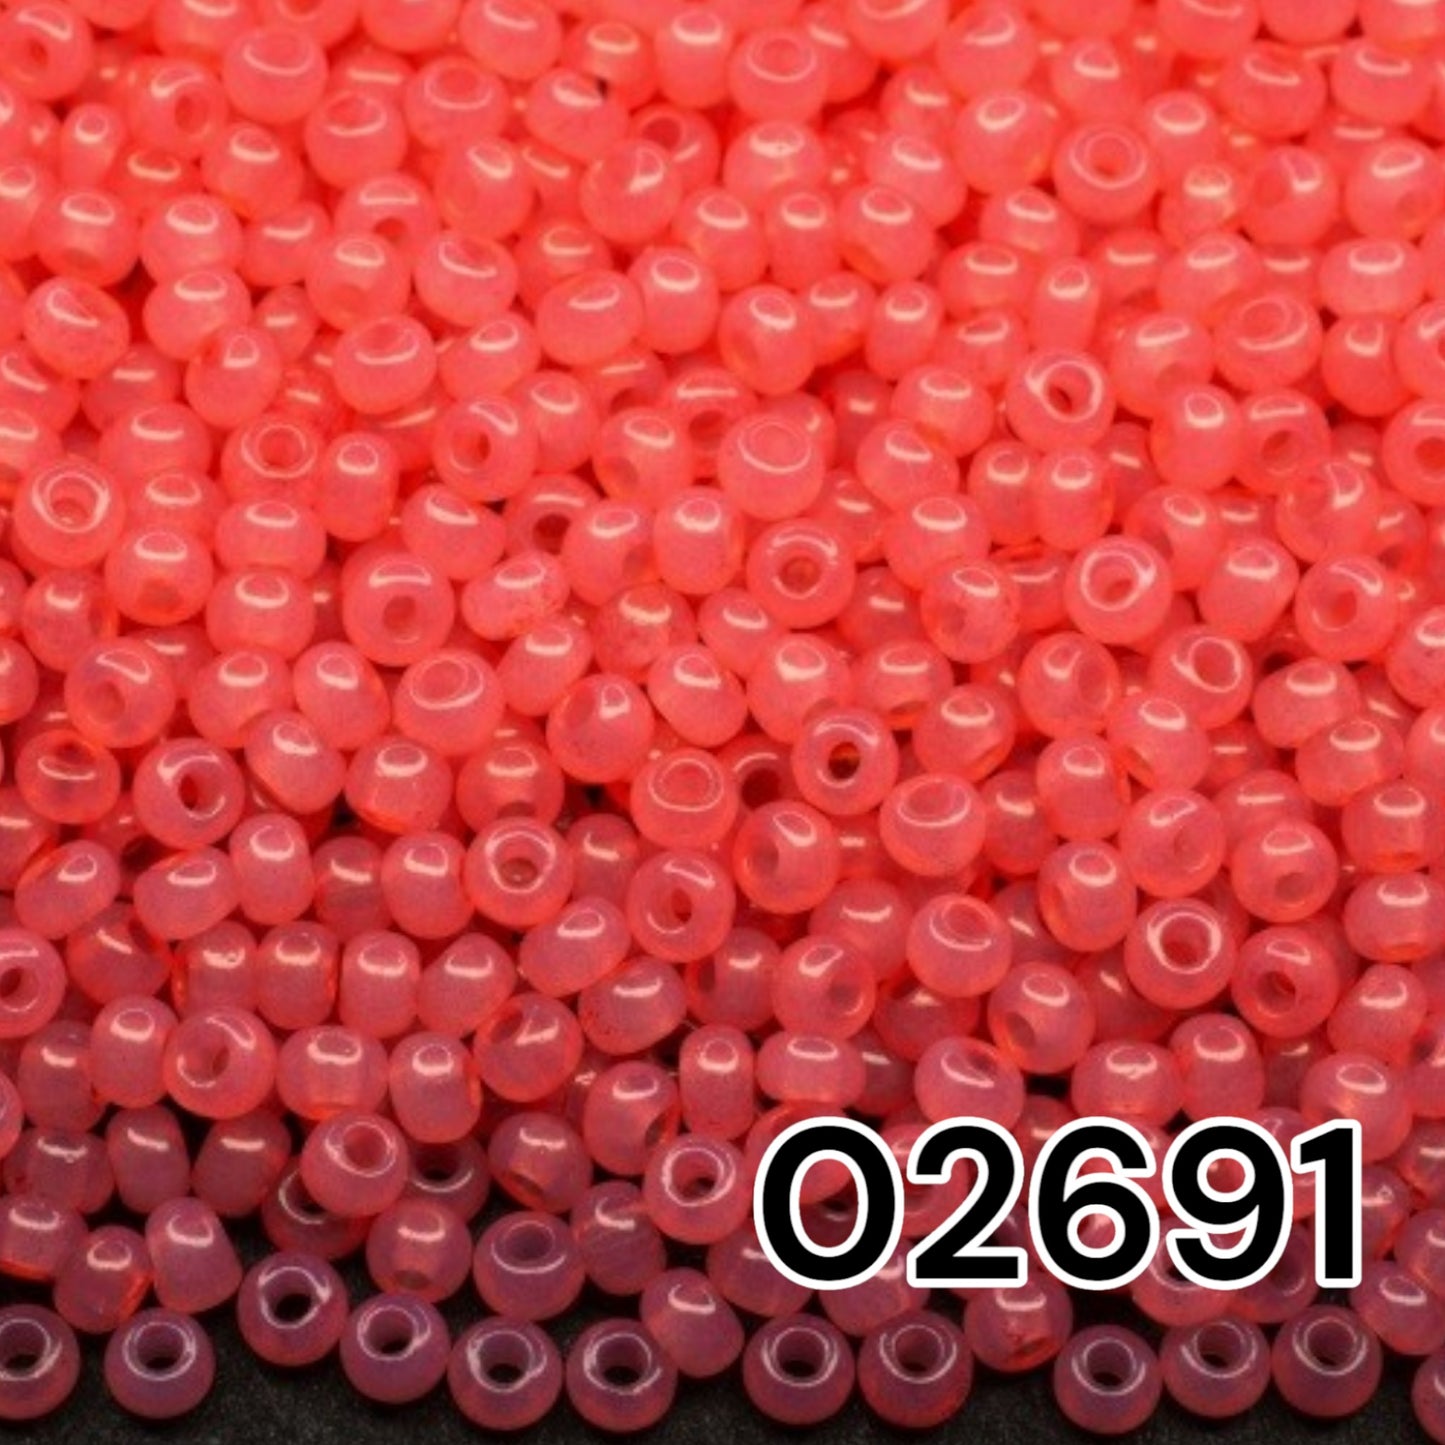 02691 Czech seed beads PRECIOSA round 10/0 pink. Alabaster - Solgel Dyed.